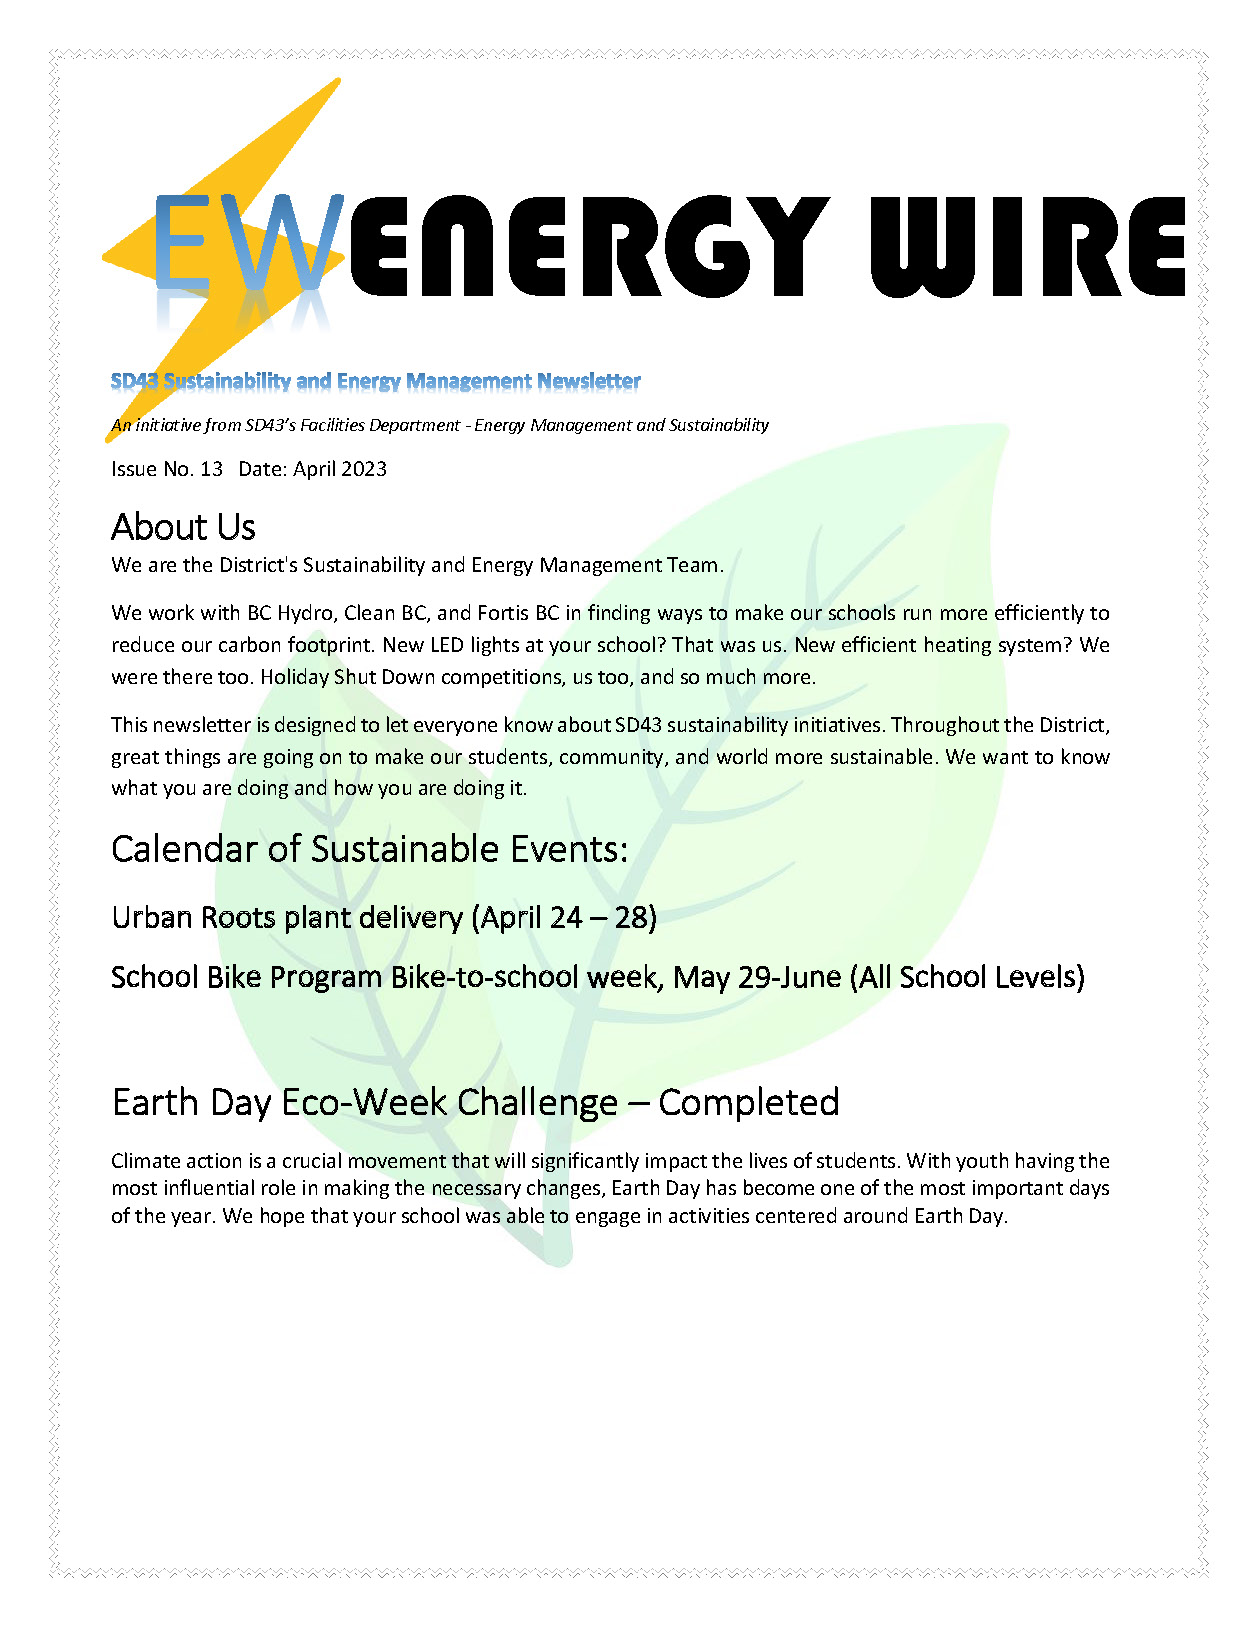 Energy Wire Newsletter April 2023_Page_1.jpg